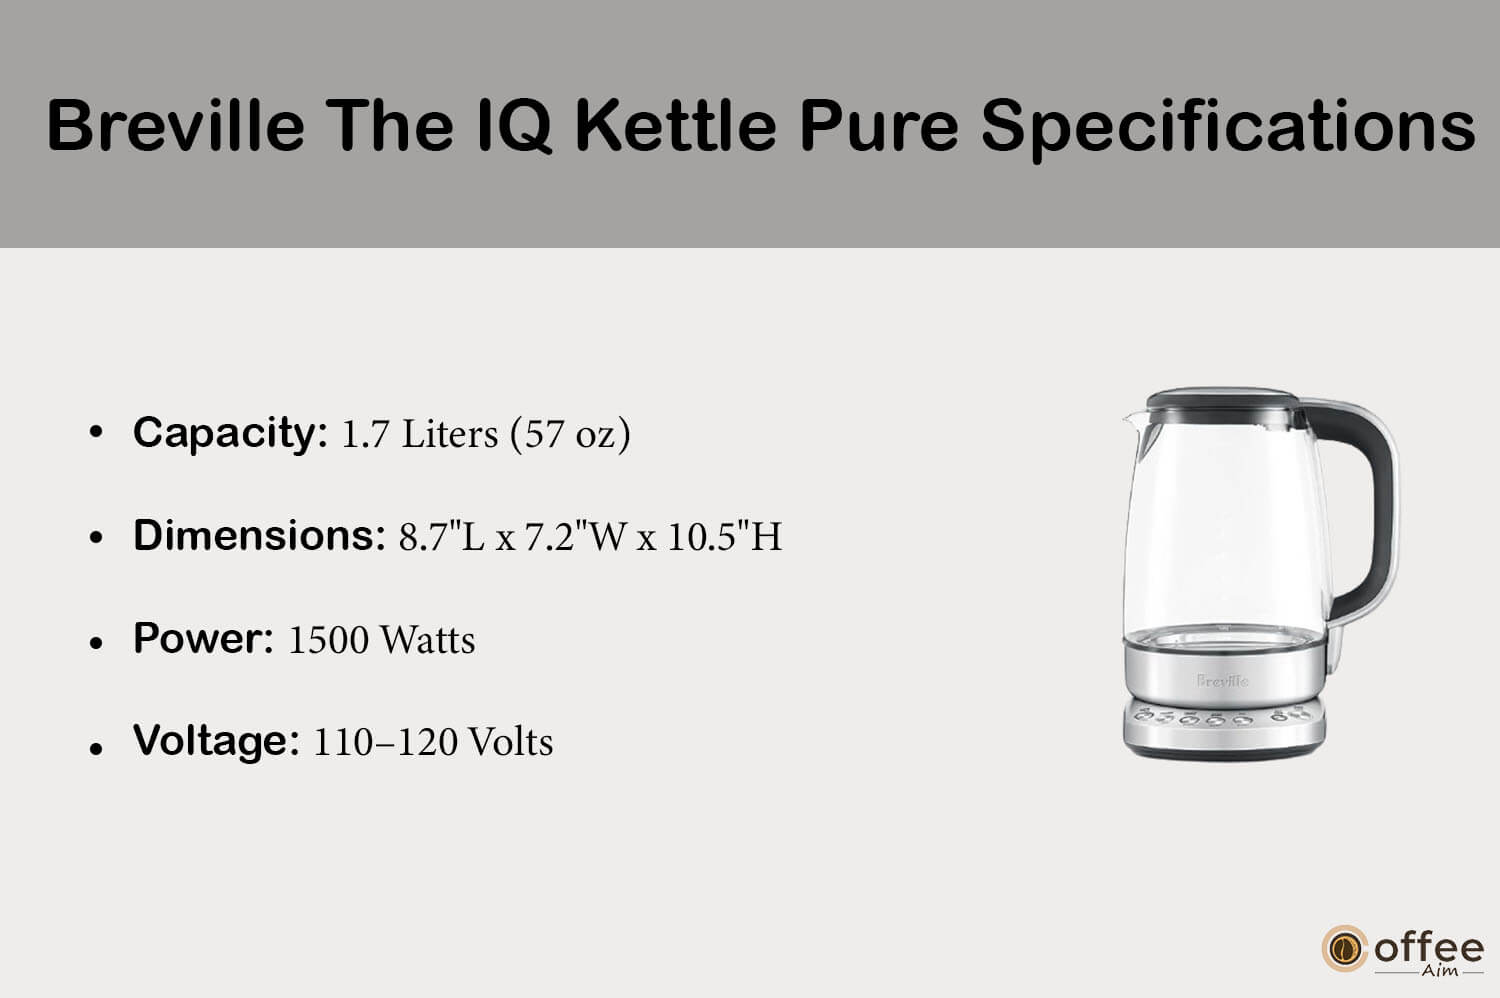 "This image showcases the specifications of 'Breville The IQ Kettle Pure' as detailed in our in-depth review article."